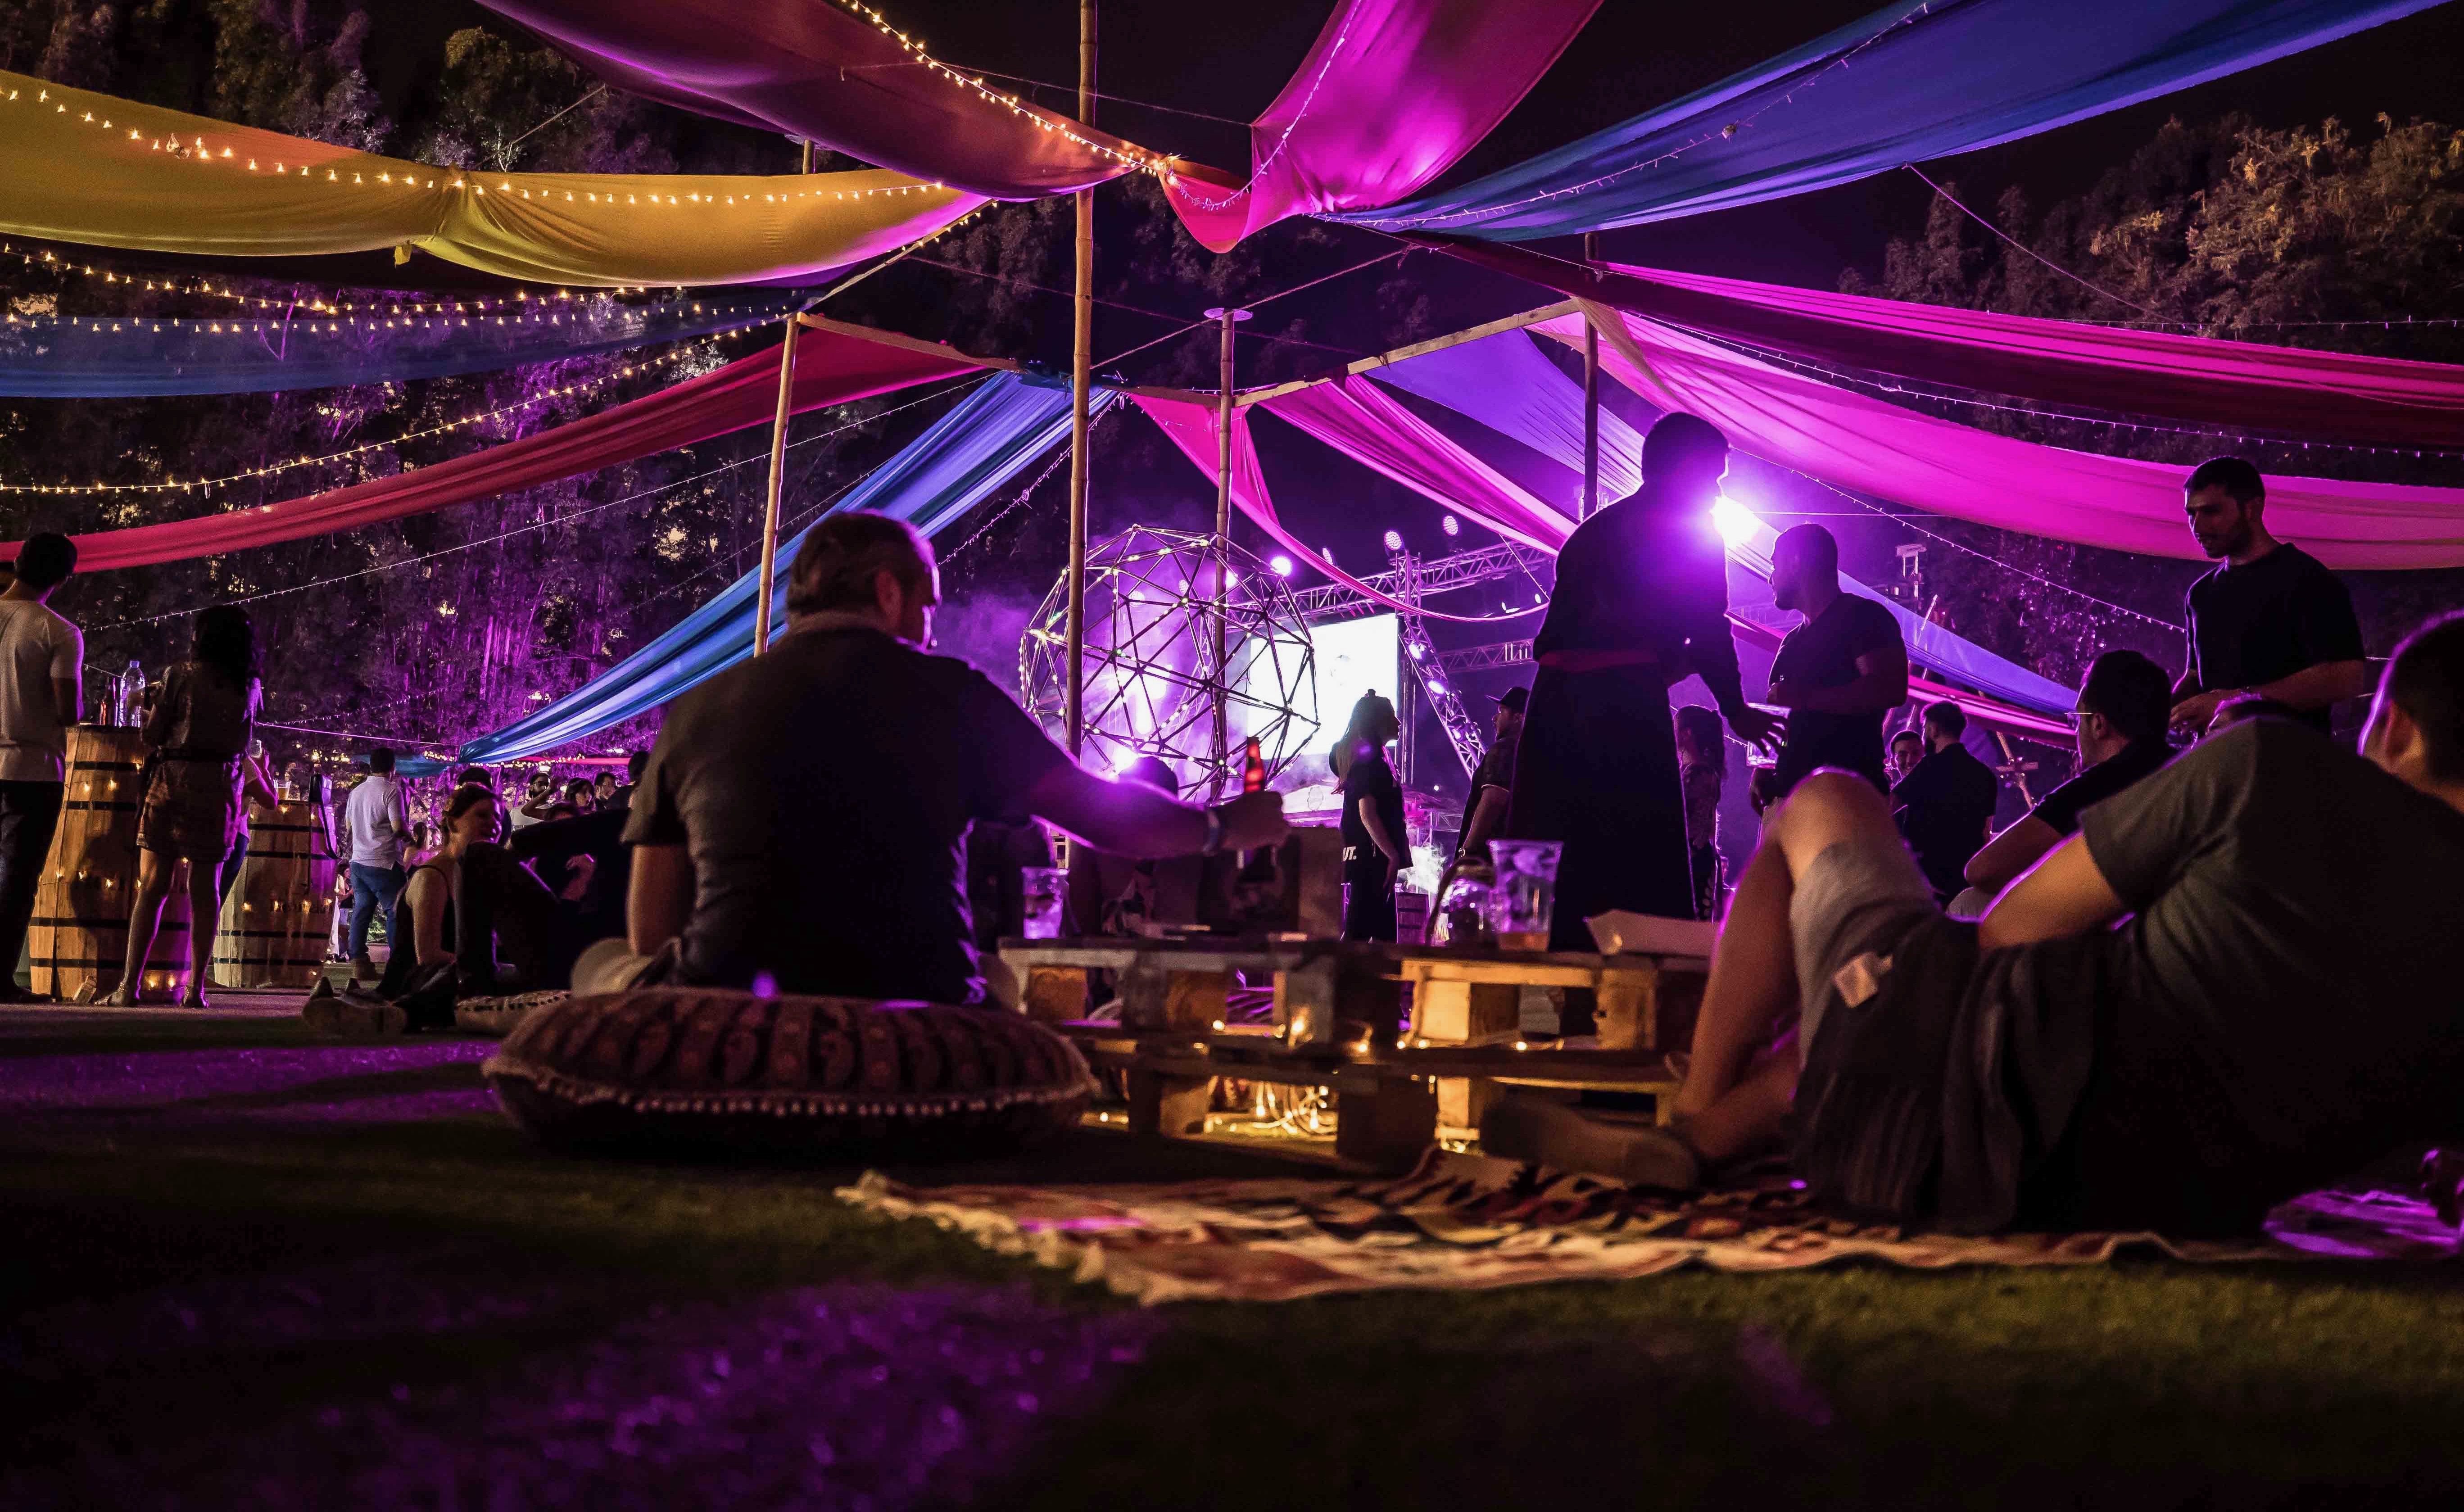 Dubai’s Established Festival Kaynouna Are Back To Teach You the Art Of Chilling